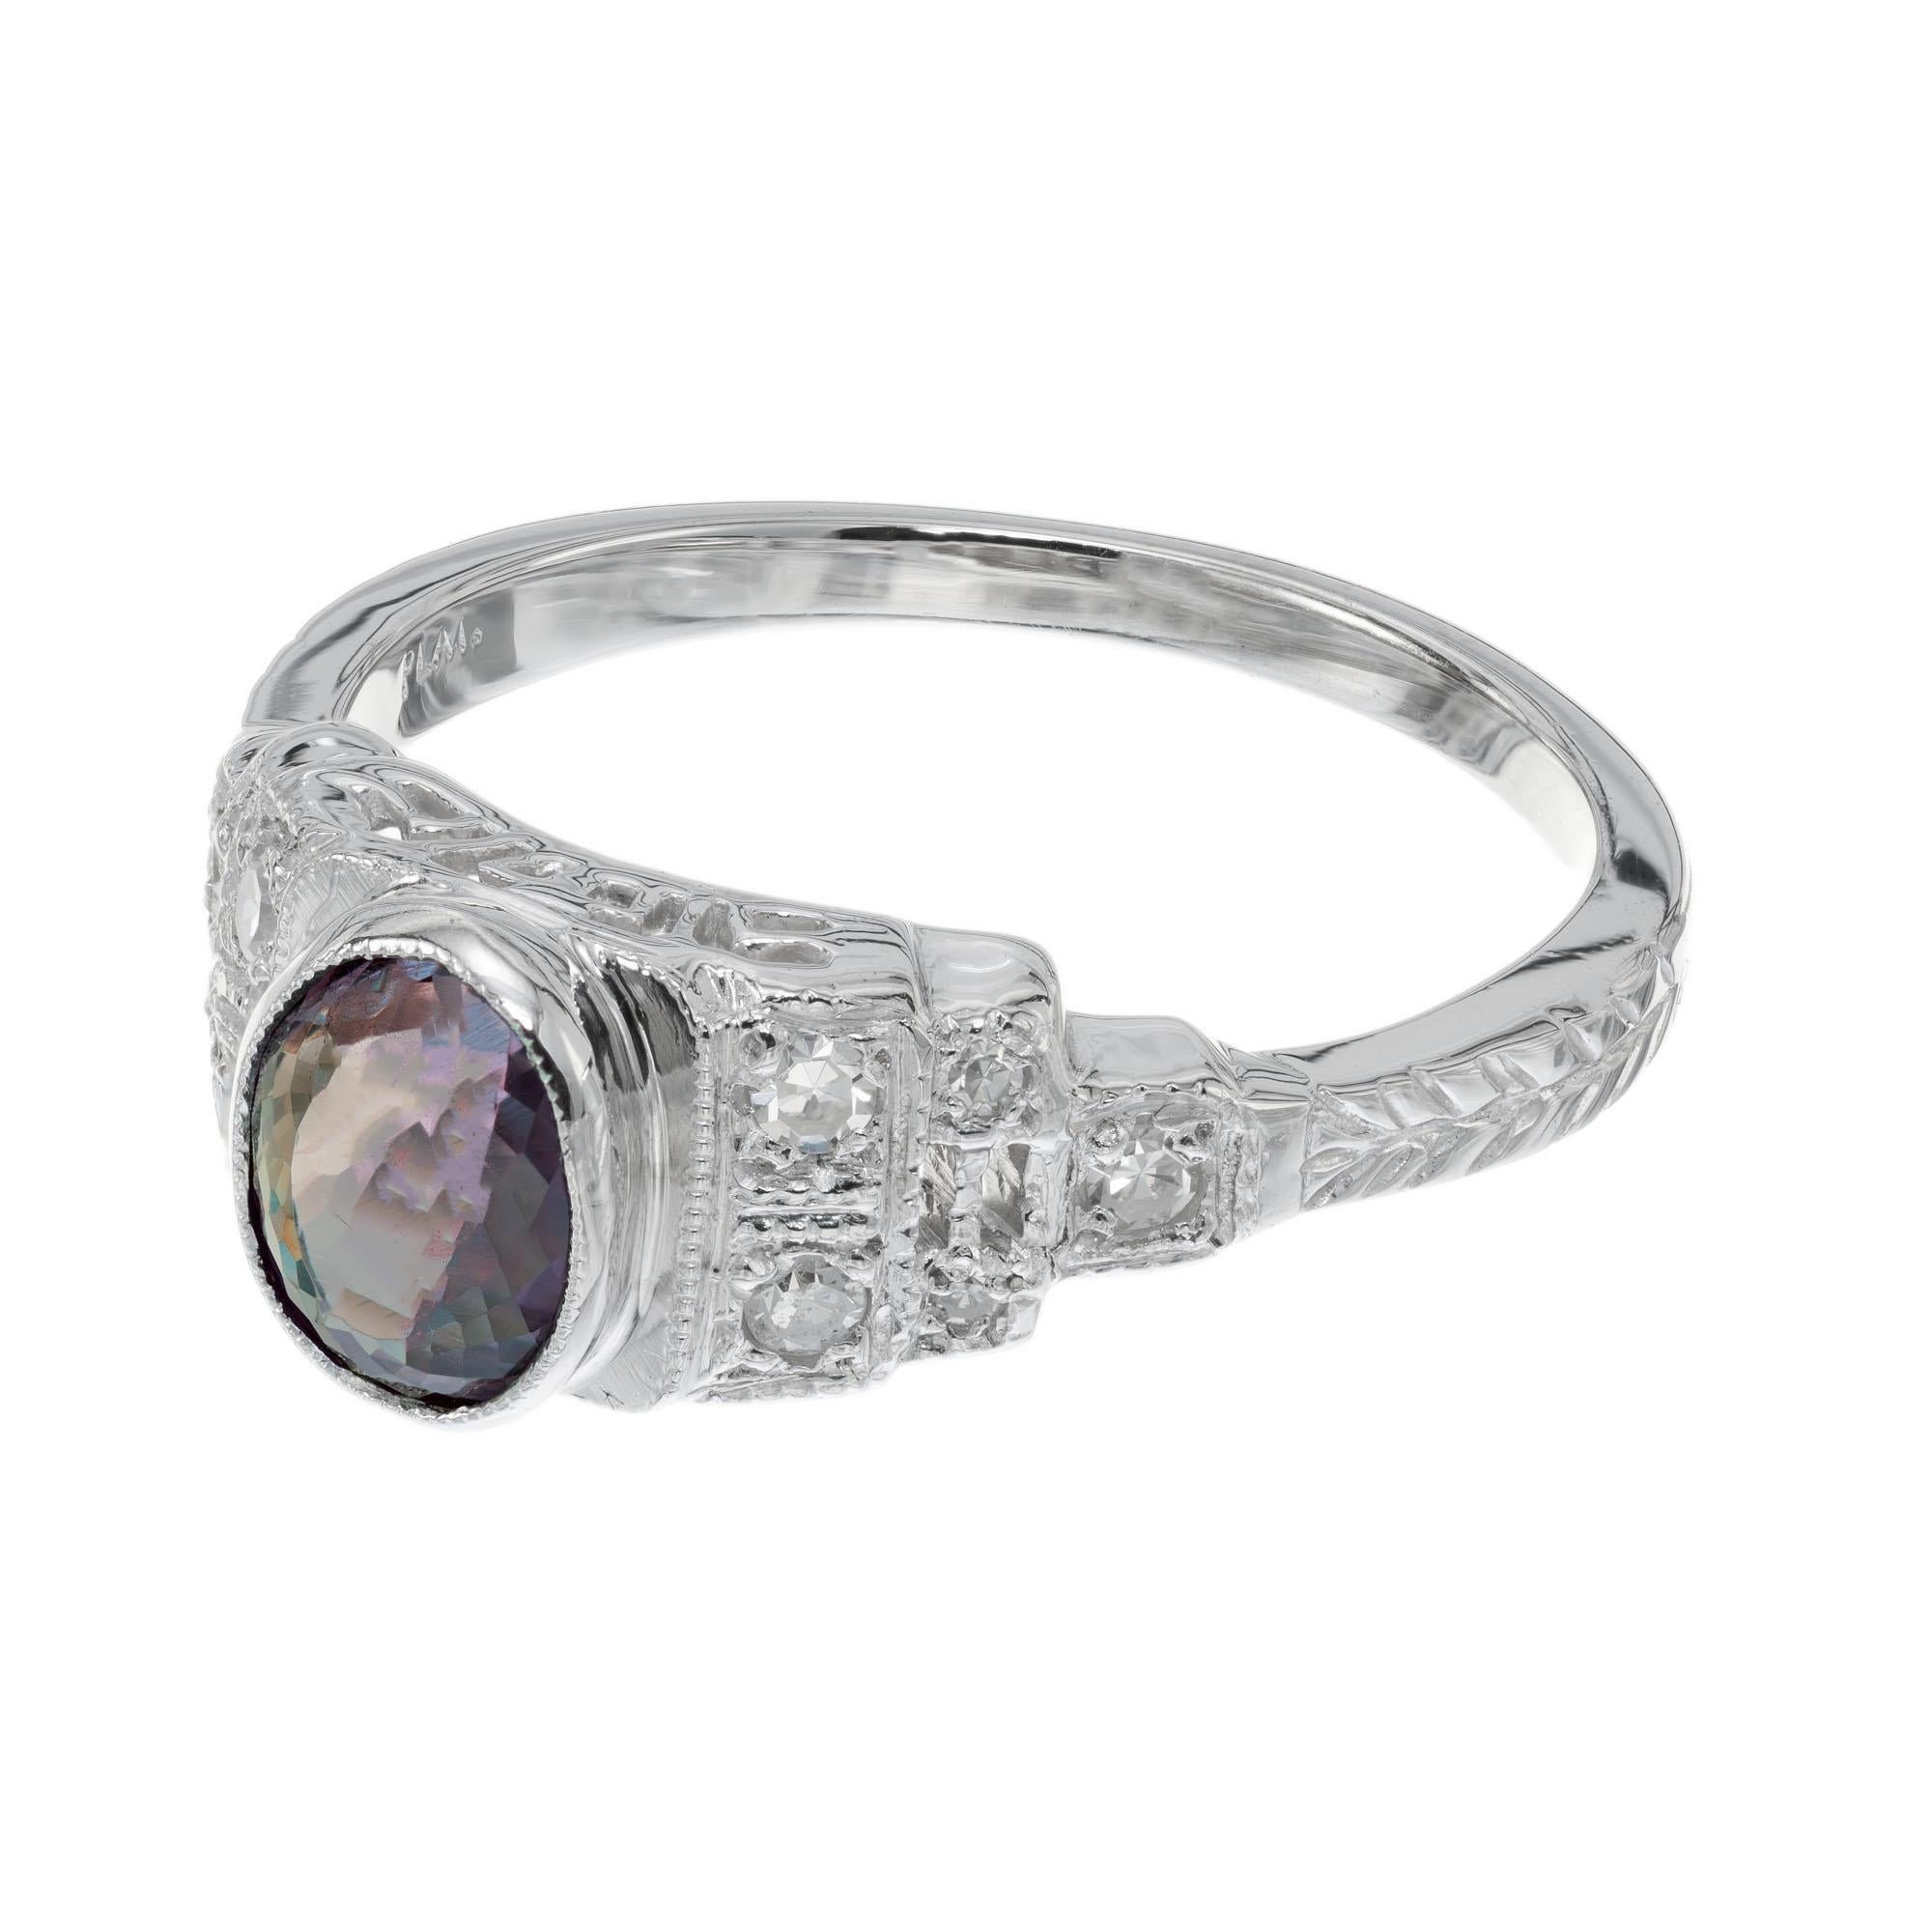 1920's Art Deco Alexandrite and diamond engagement ring. GIA certified oval center stone, .95 carats in a platinum setting with 10 round accent diamonds. The alexandrite is a color change stone, it has green, grey and red color tones. 

1 oval